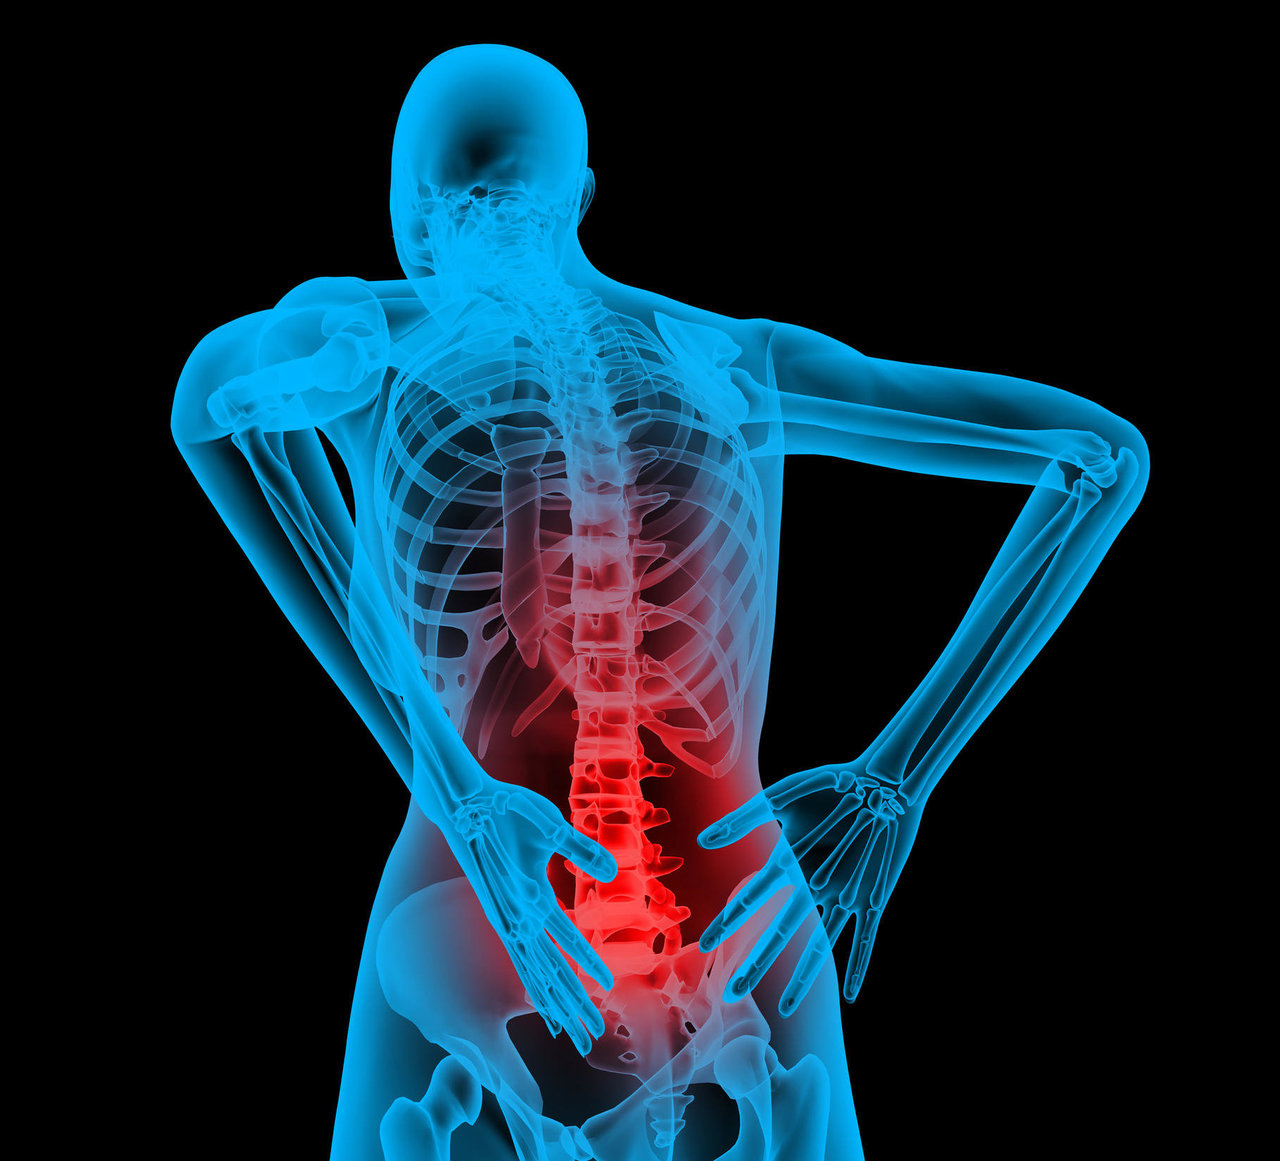 Back pain: we're treating it all wrong